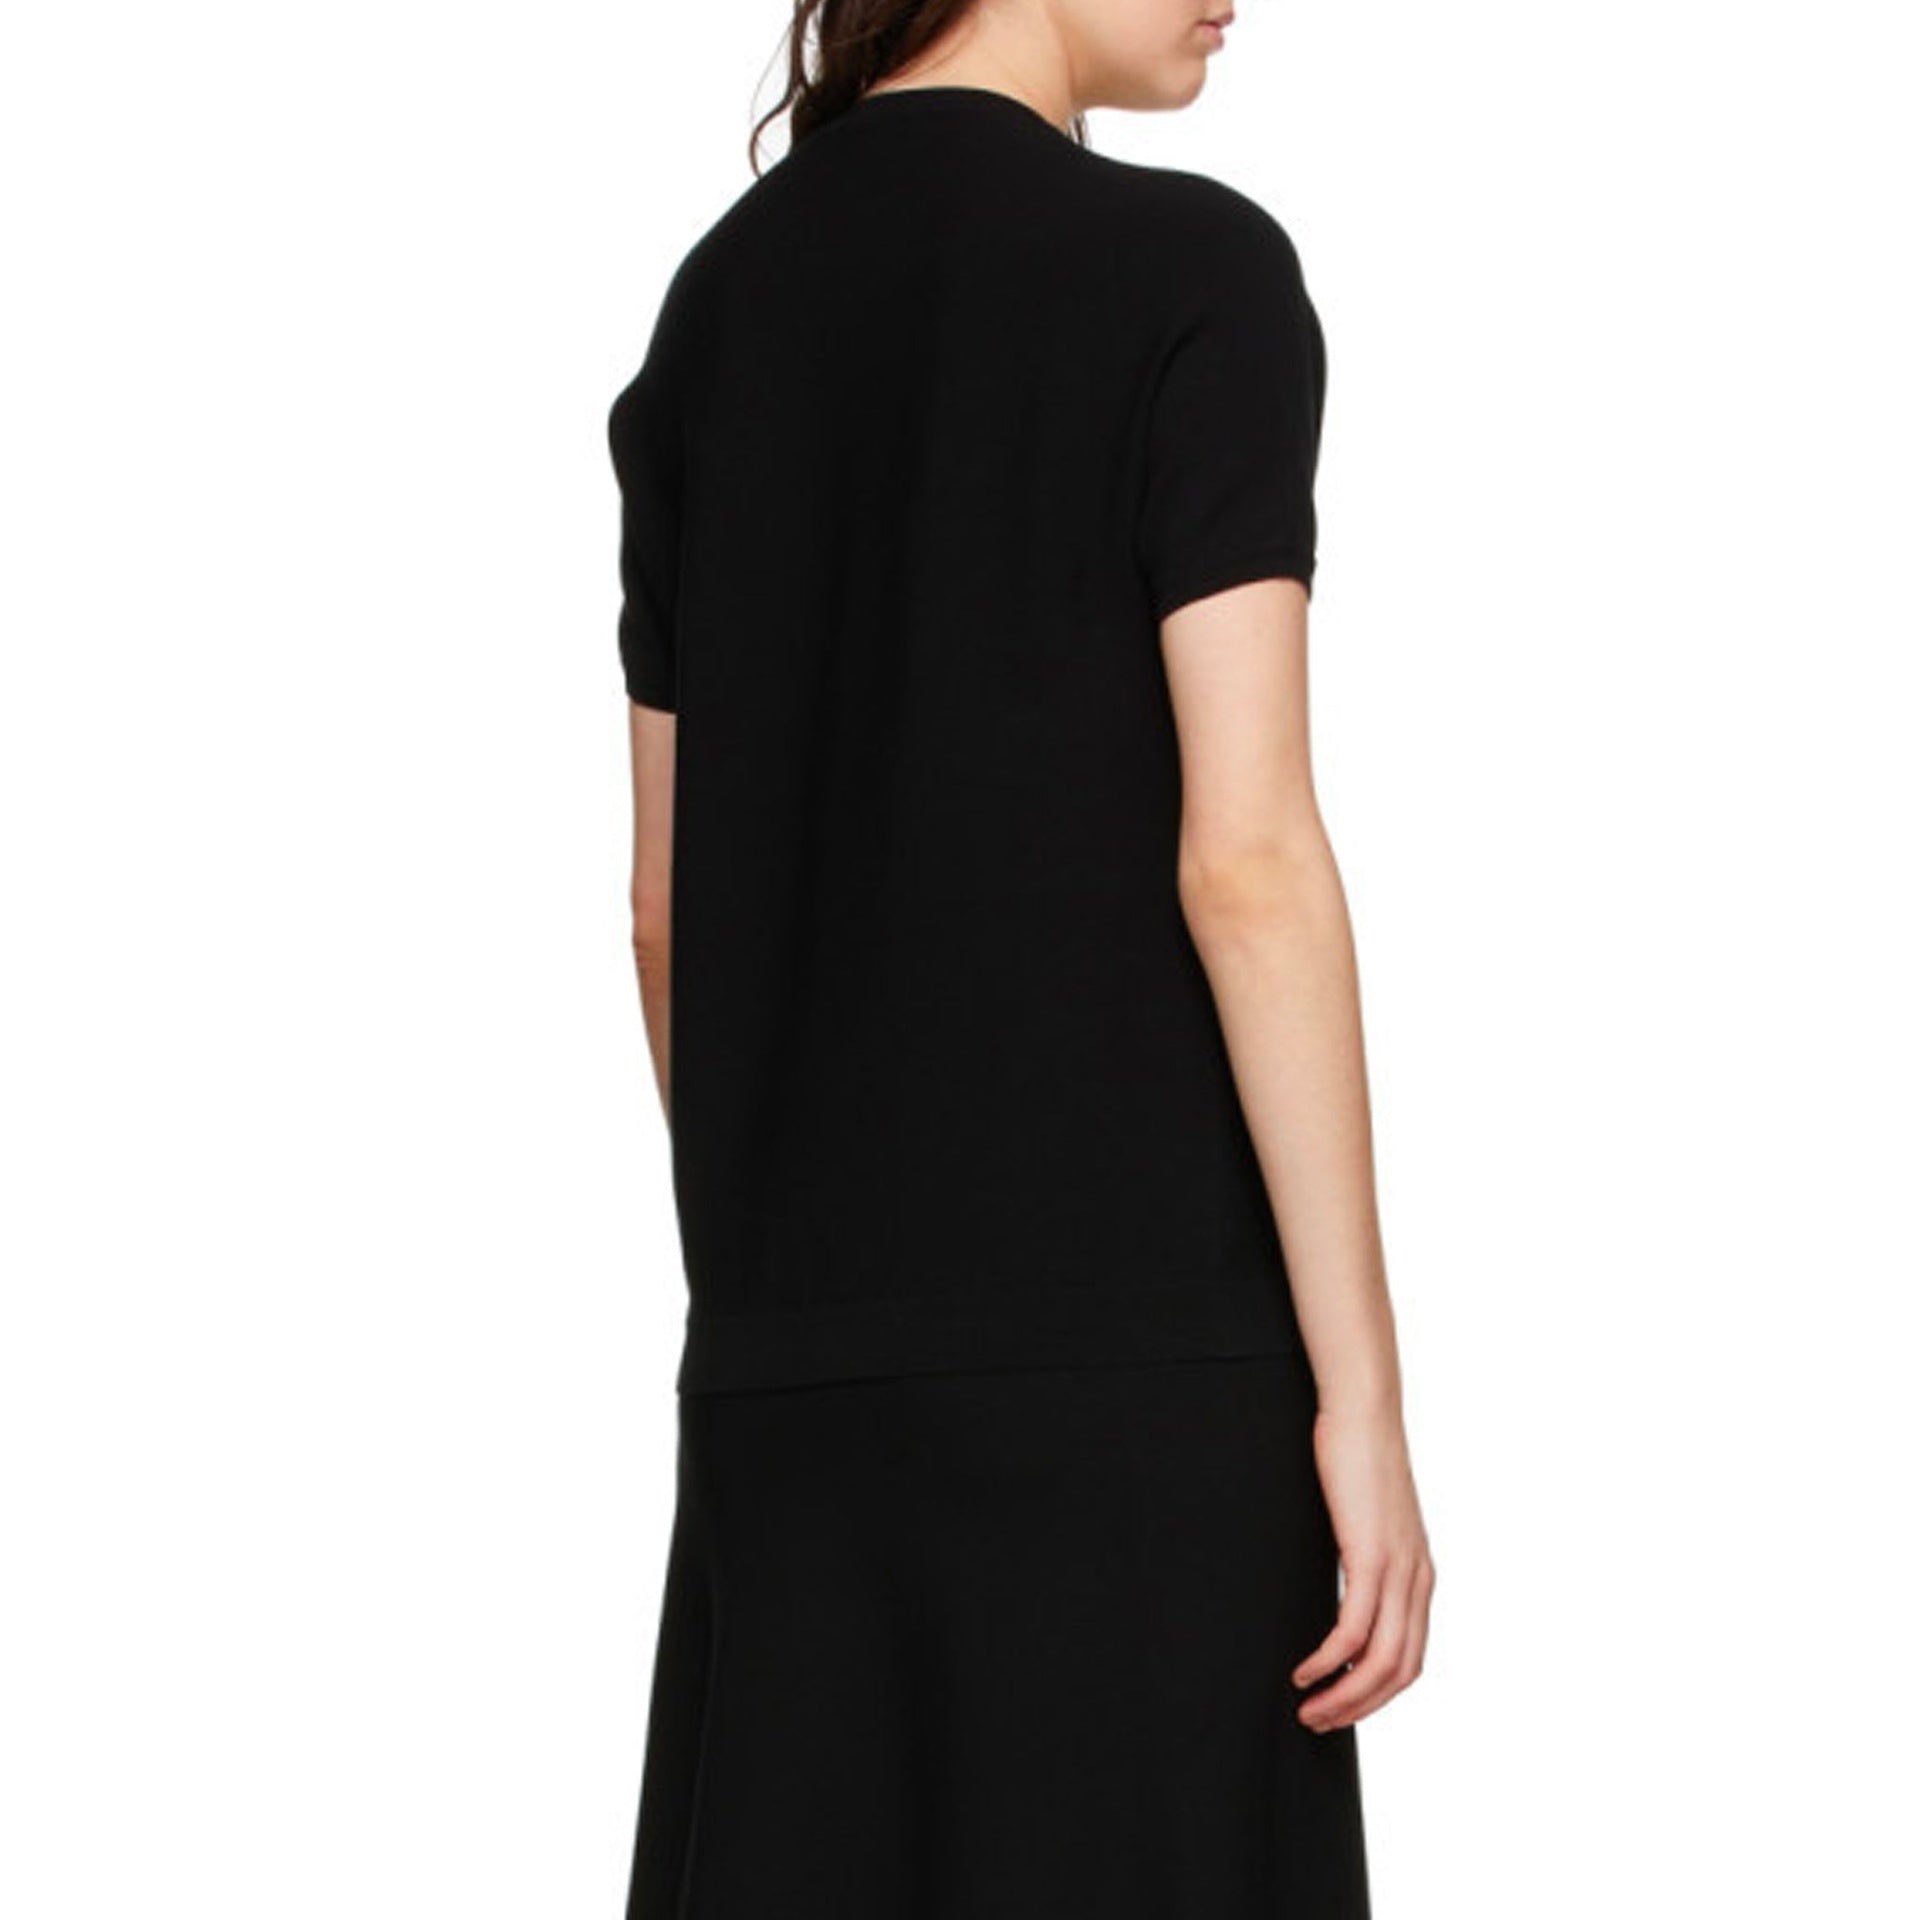 S-MAX-MARA-OUTLET-SALE-s-Max-Mara-Tea-Knitted-T-shirt-Shirts-BLACK-S-ARCHIVE-COLLECTION-3.jpg